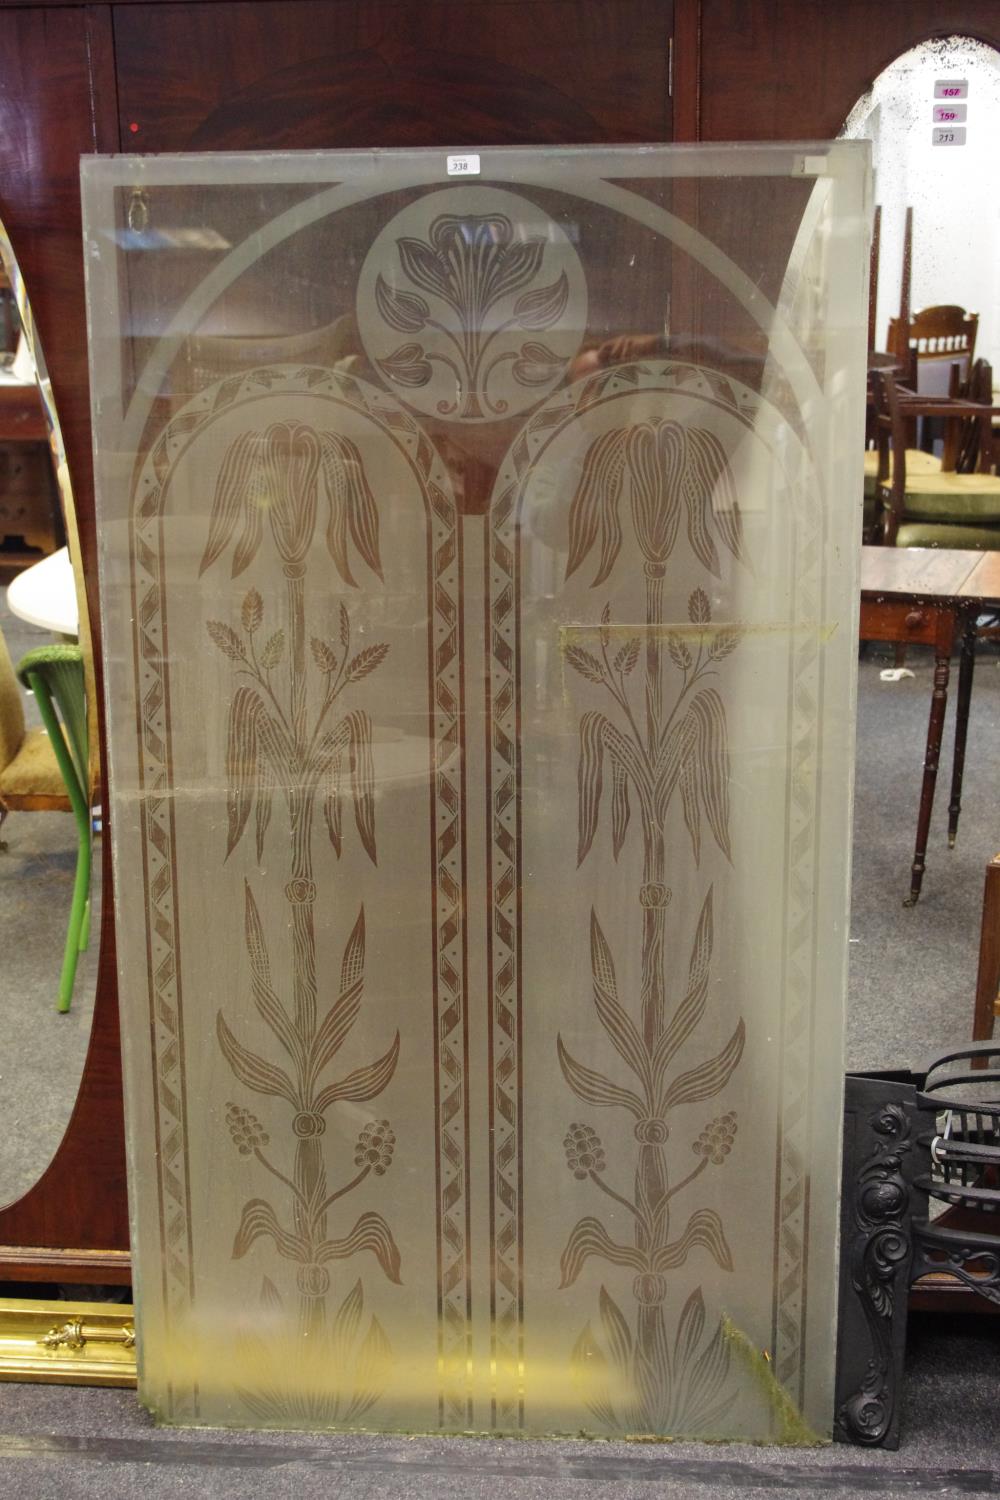 A large early 20th century etched window pane.